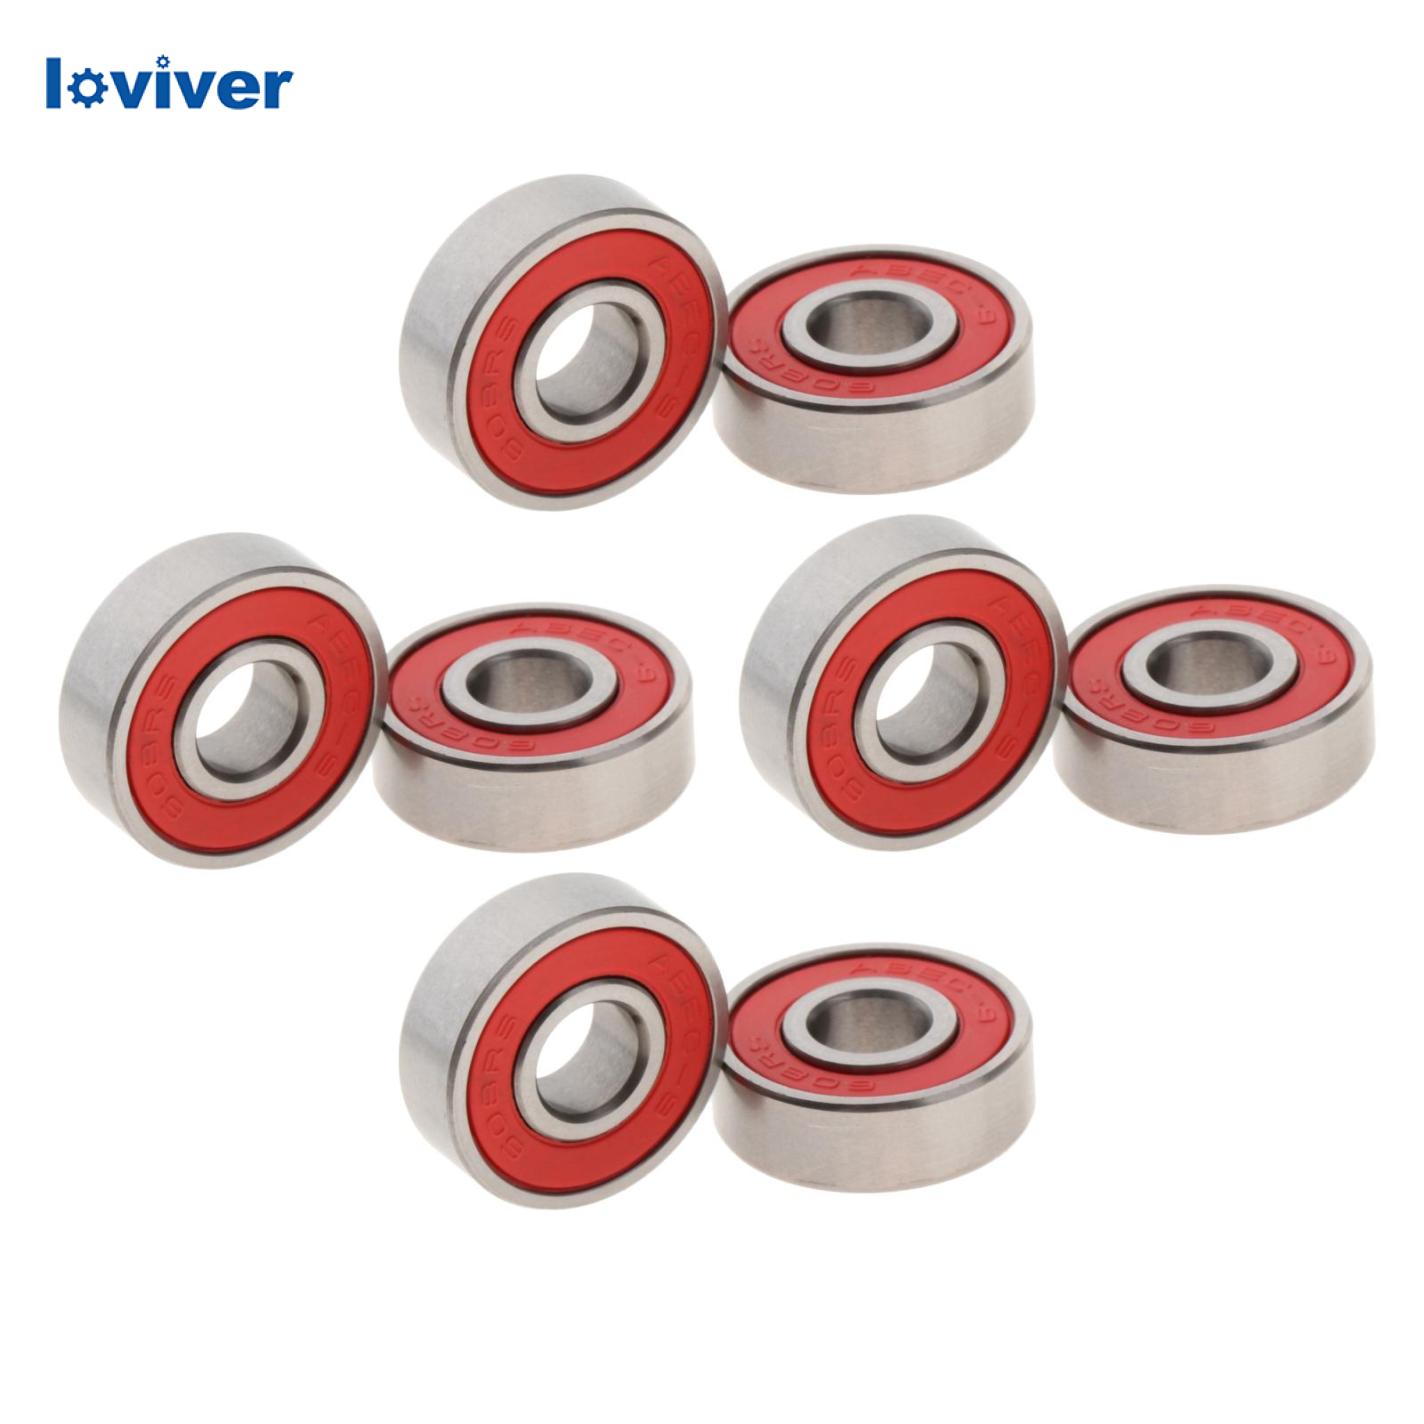 Loviver 8 Pieces ABEC-9 Skateboard Bearing Skates Roller Sealed Maintain Component